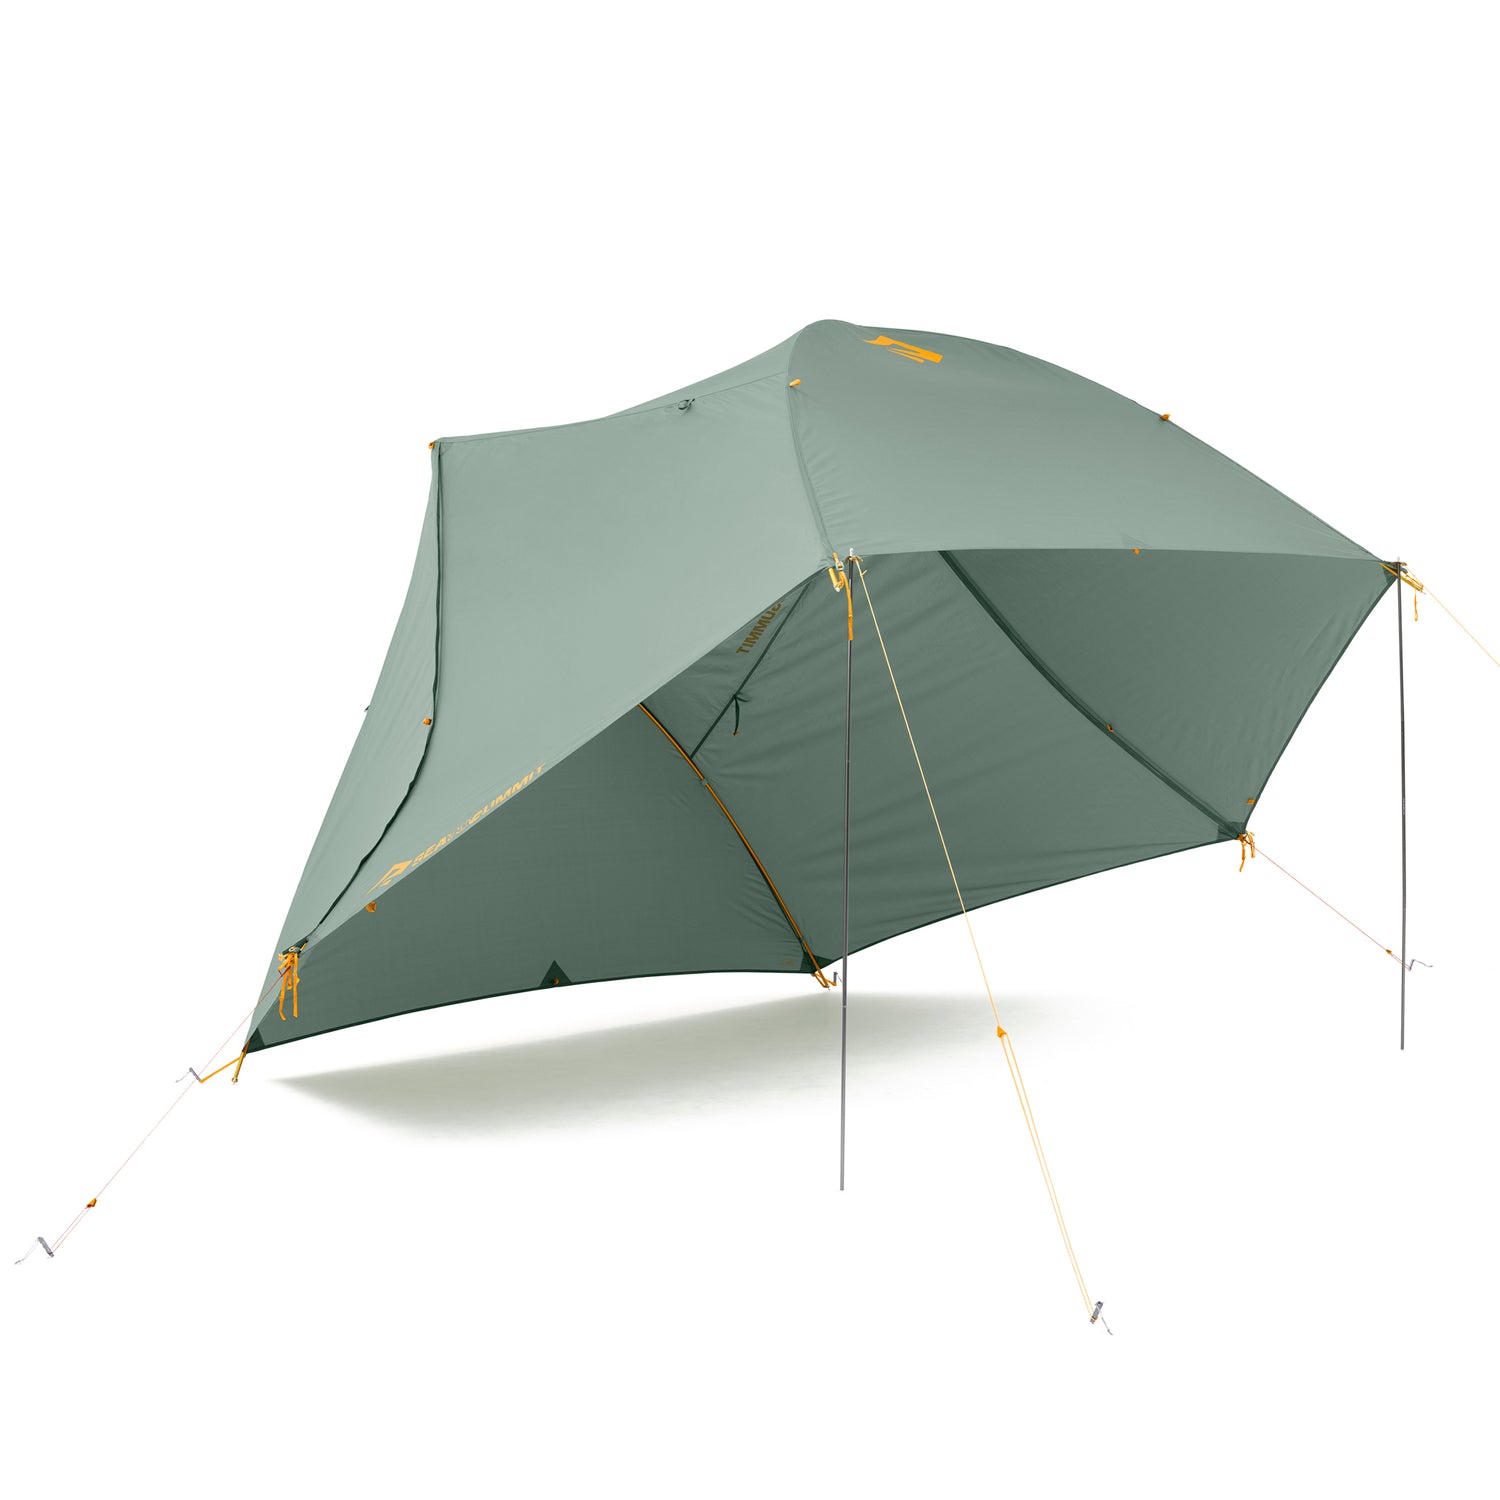 Sea to Summit Ikos tent empowers flexible, space-boosting adventure